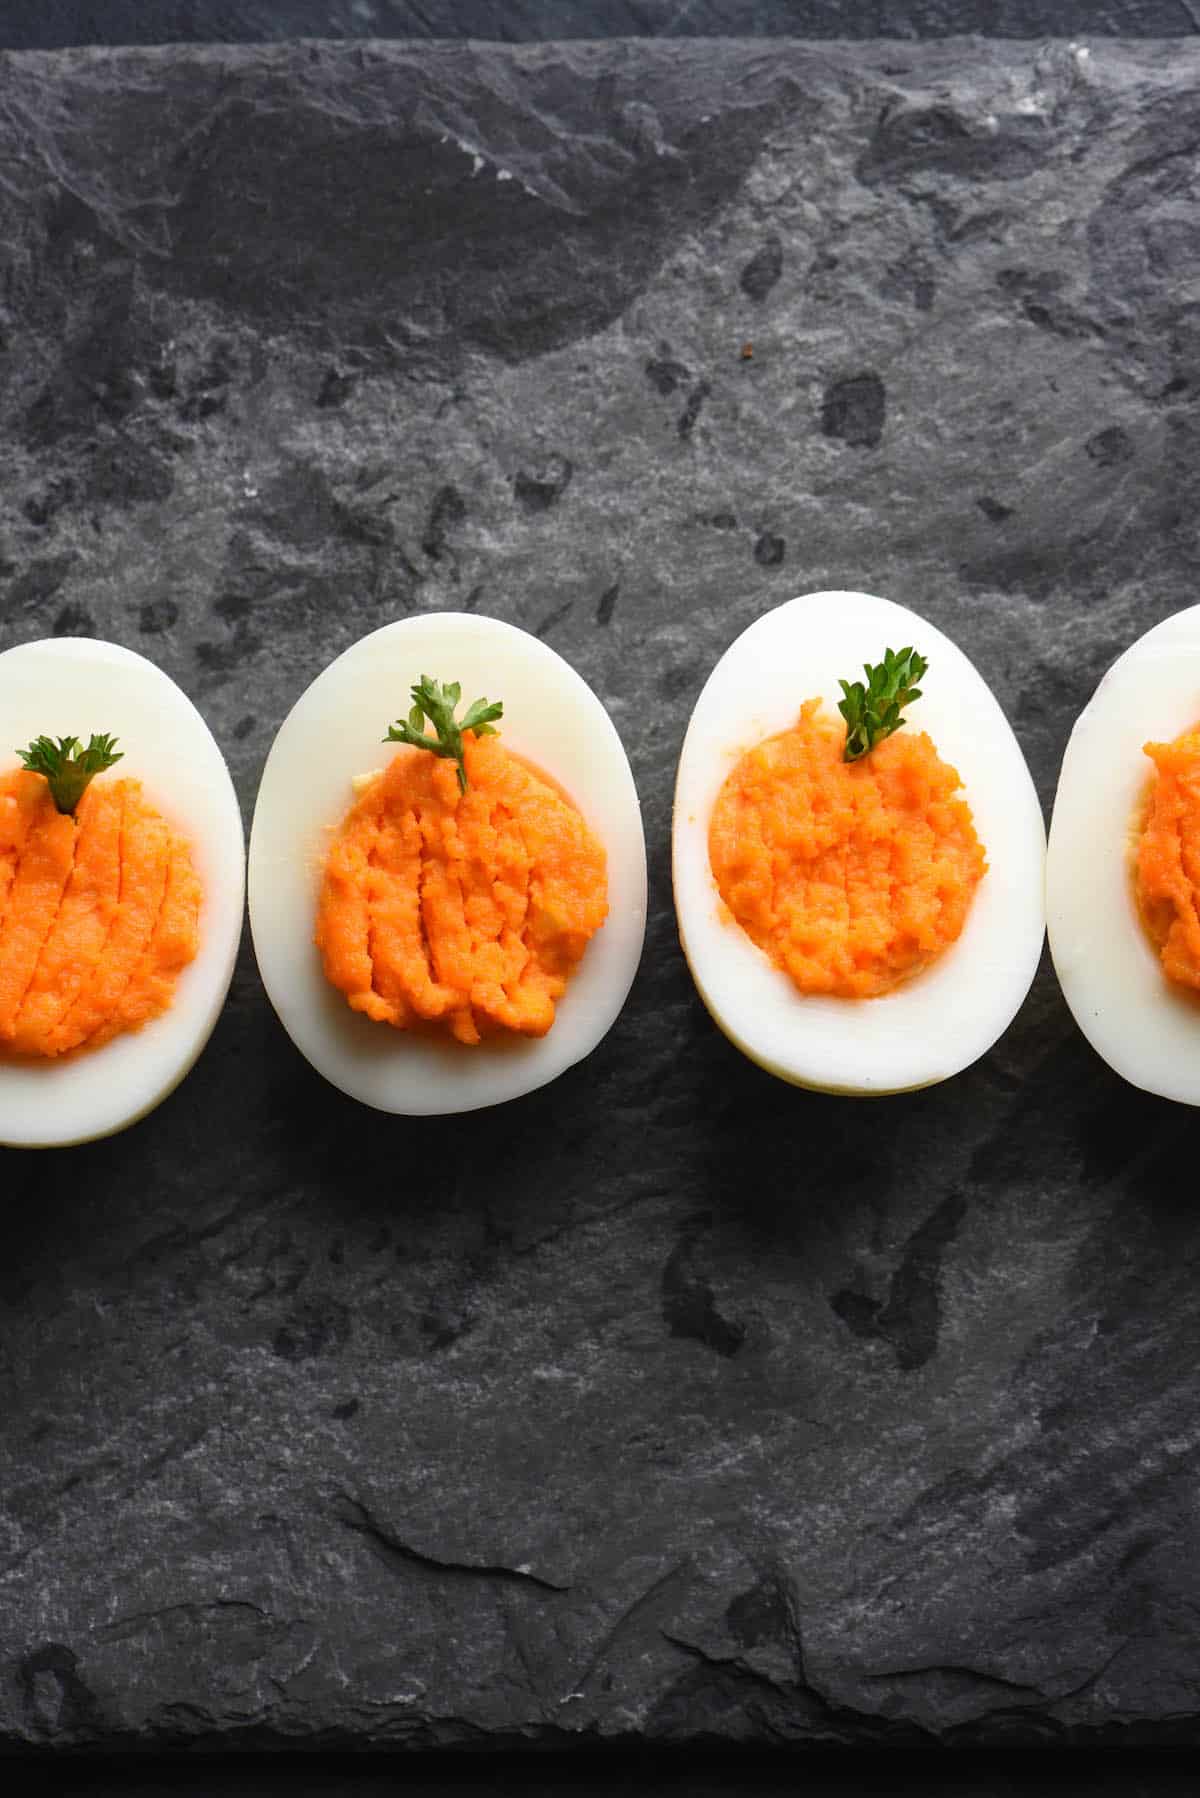 Pumpkin deviled eggs with orange yolks, decorated with parsley "stems."